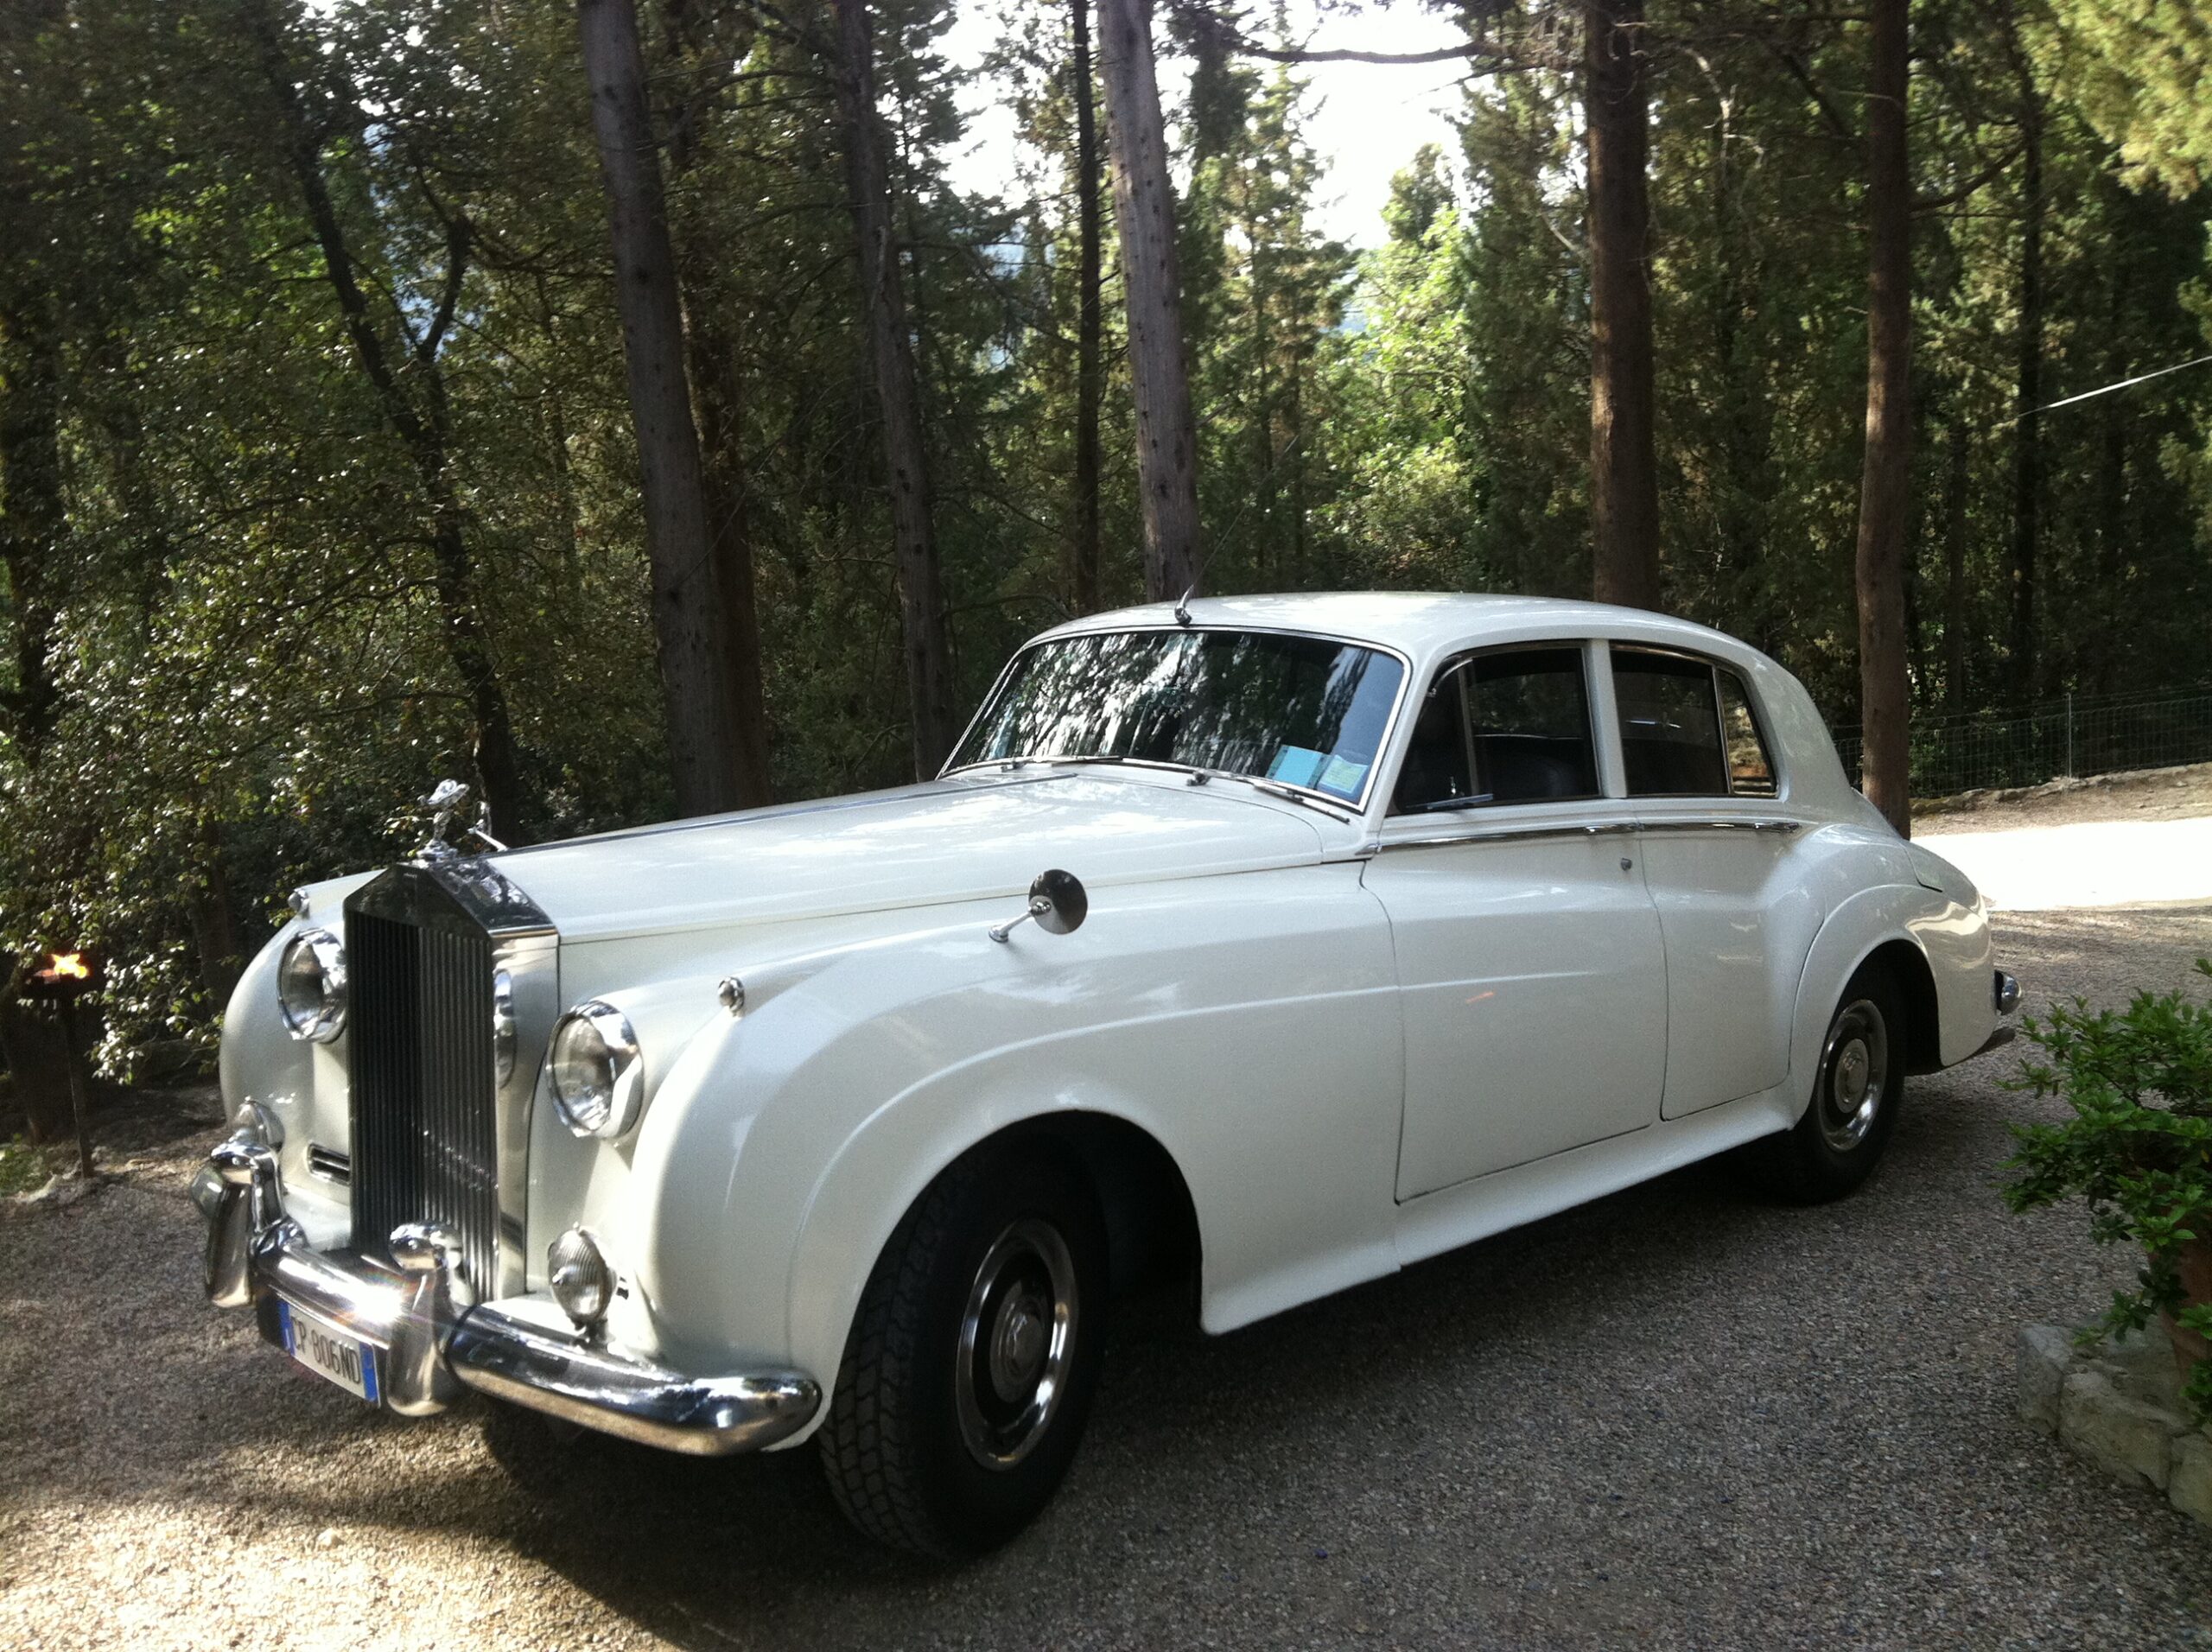 White Rolls Royce for weddings in Tuscany